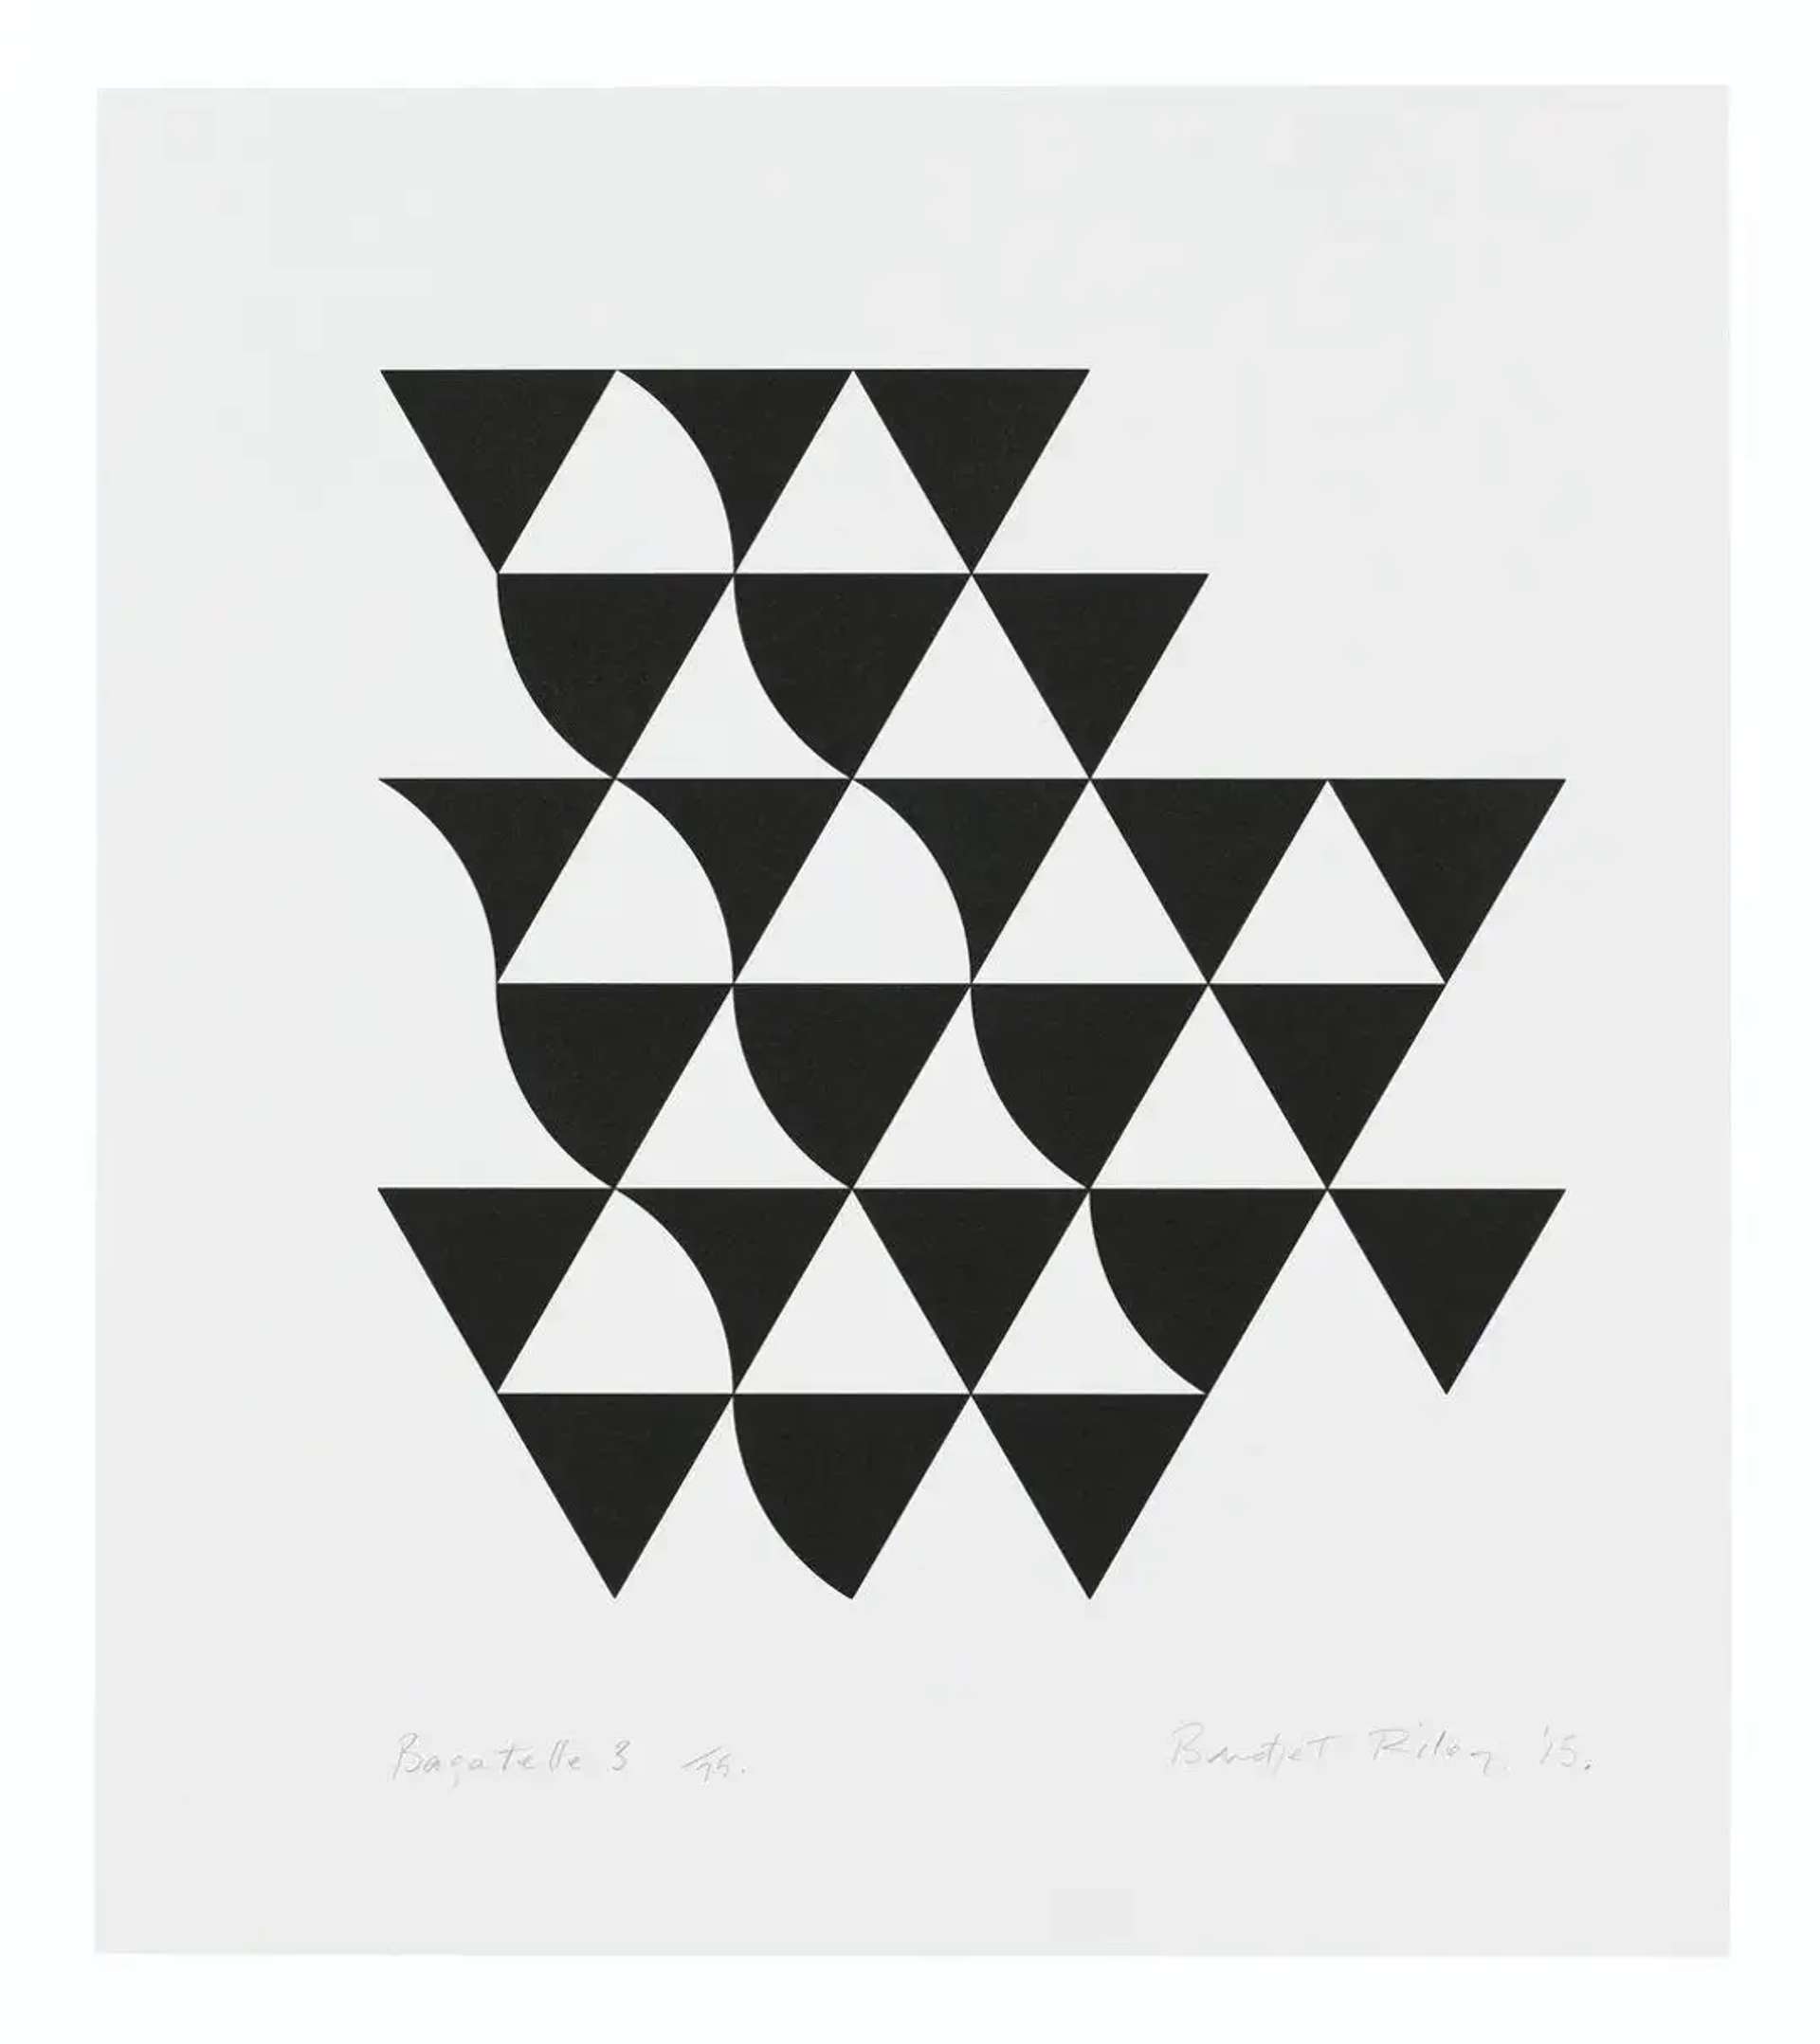 A monochrome series of triangles, some of which are curved at the edges, giving the impression of waves.